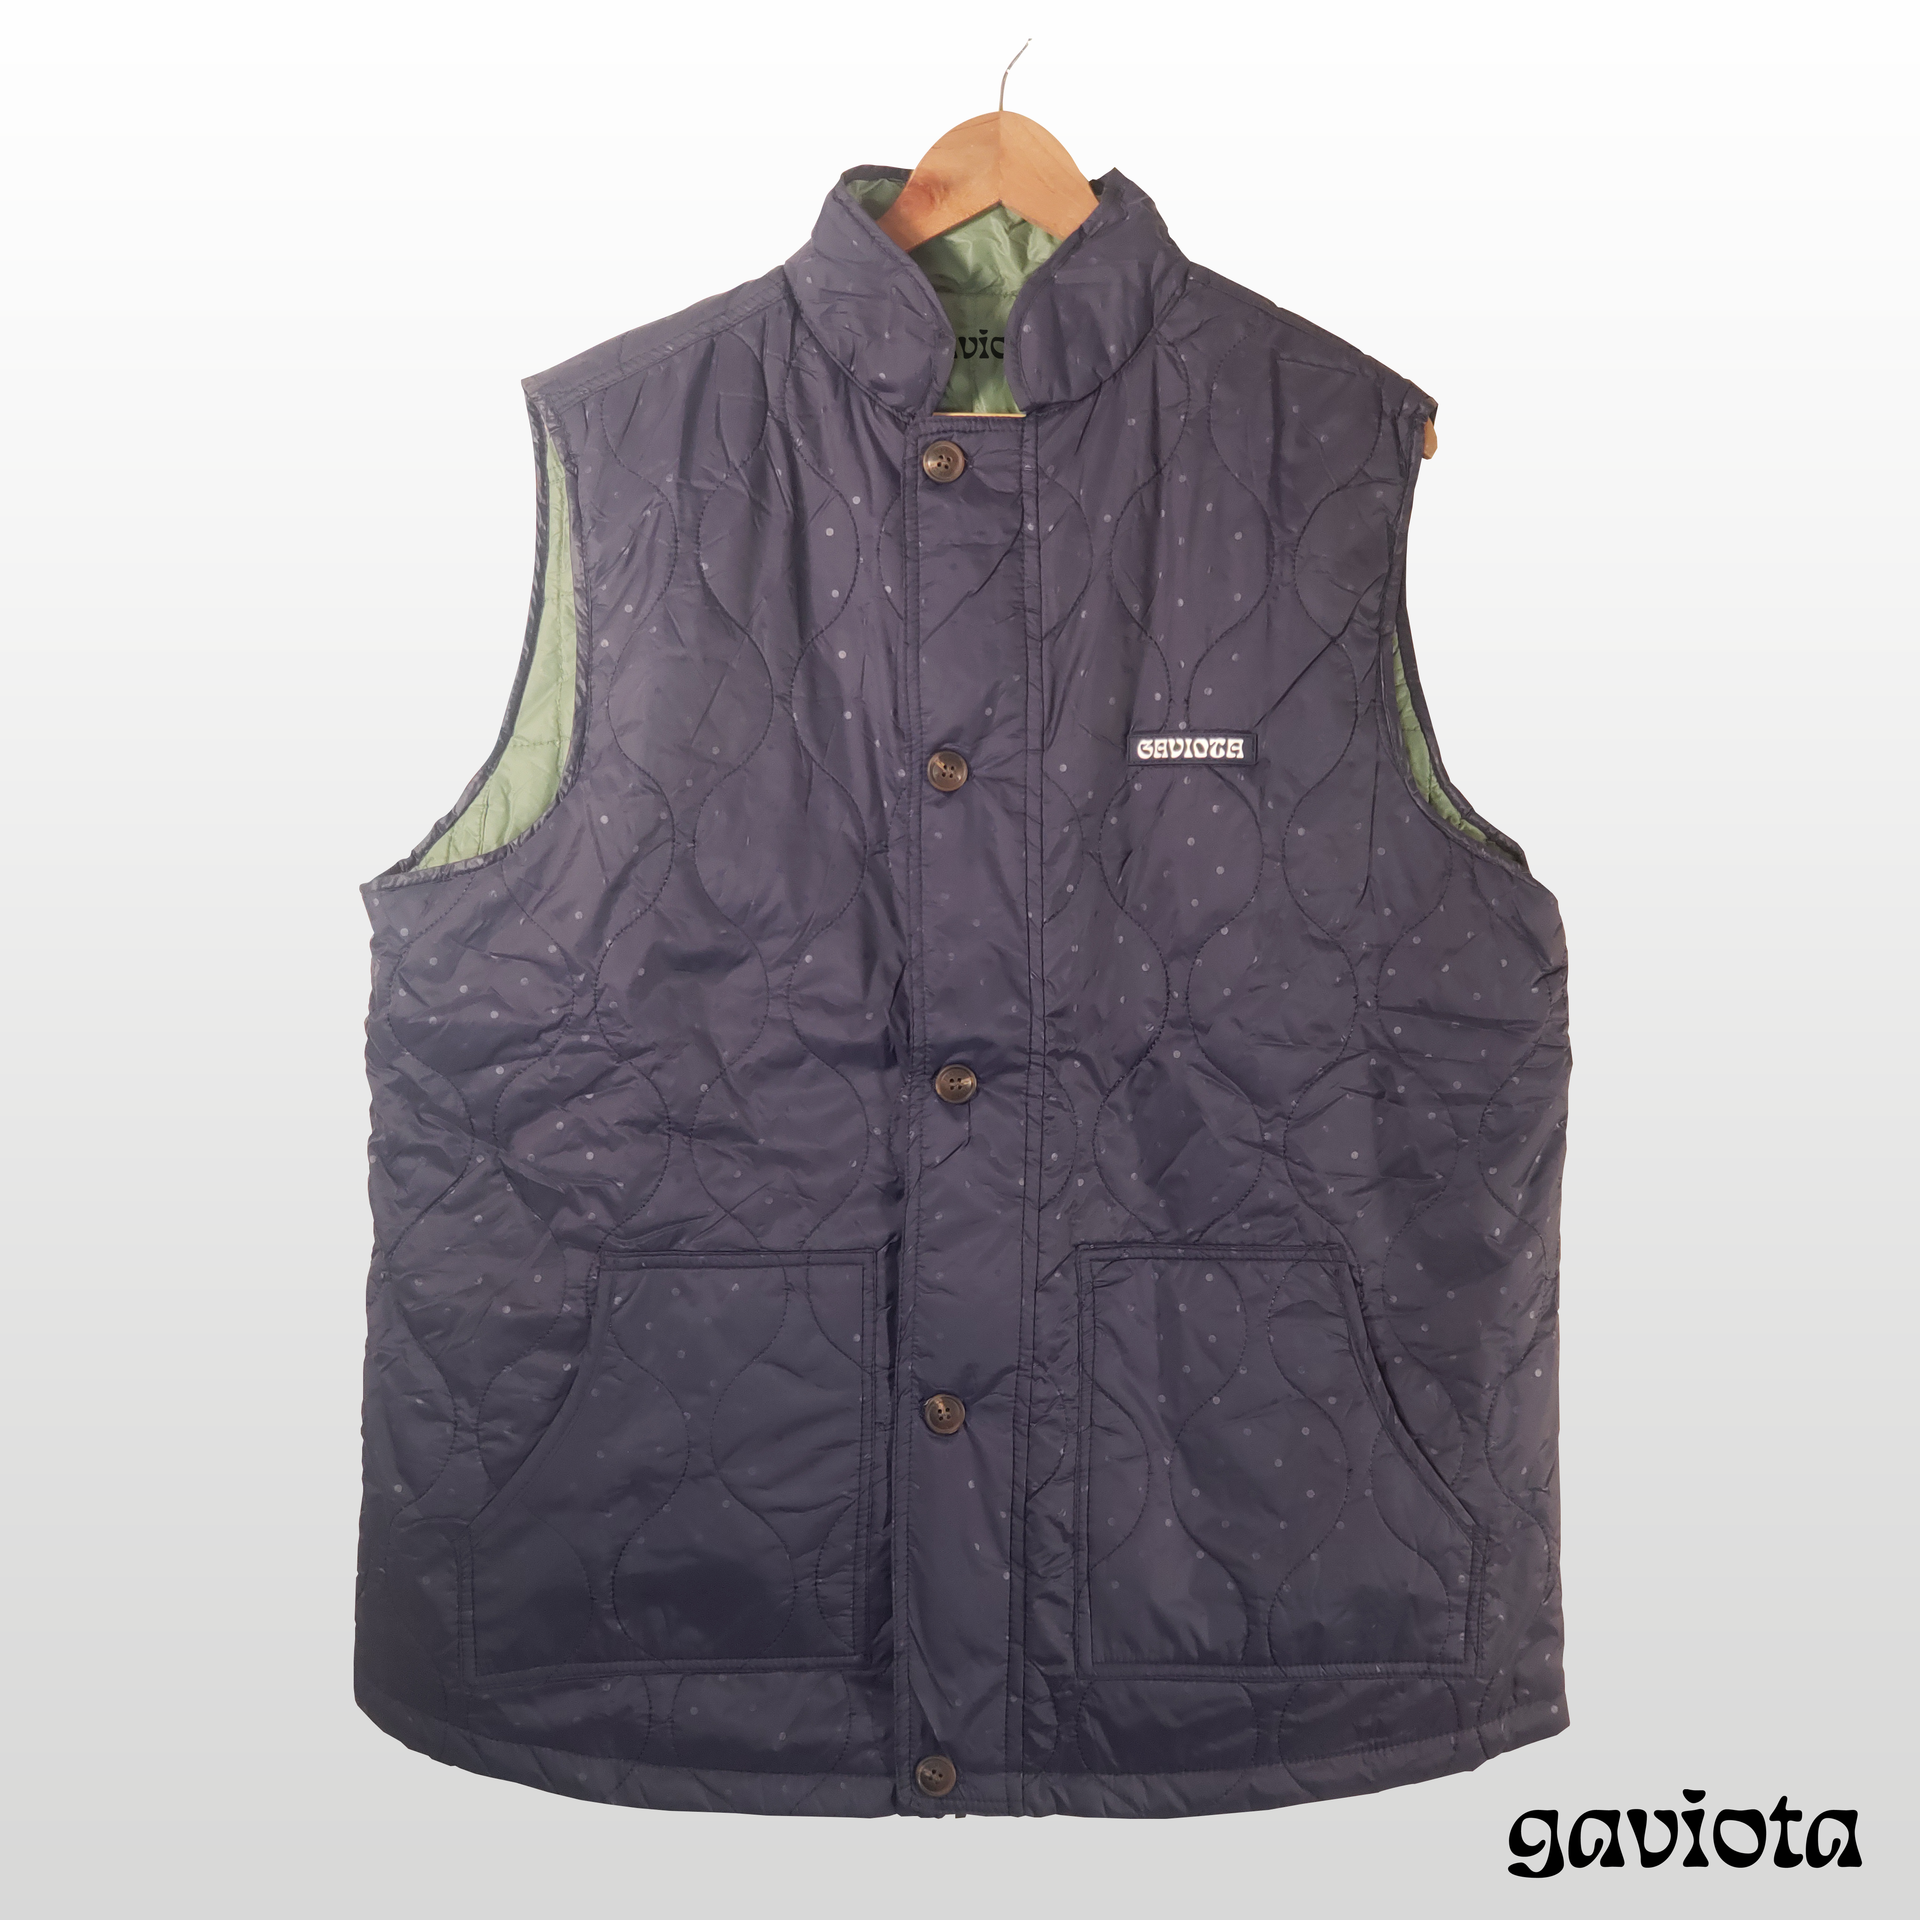 The Day Vest in Navy Blue + Pea